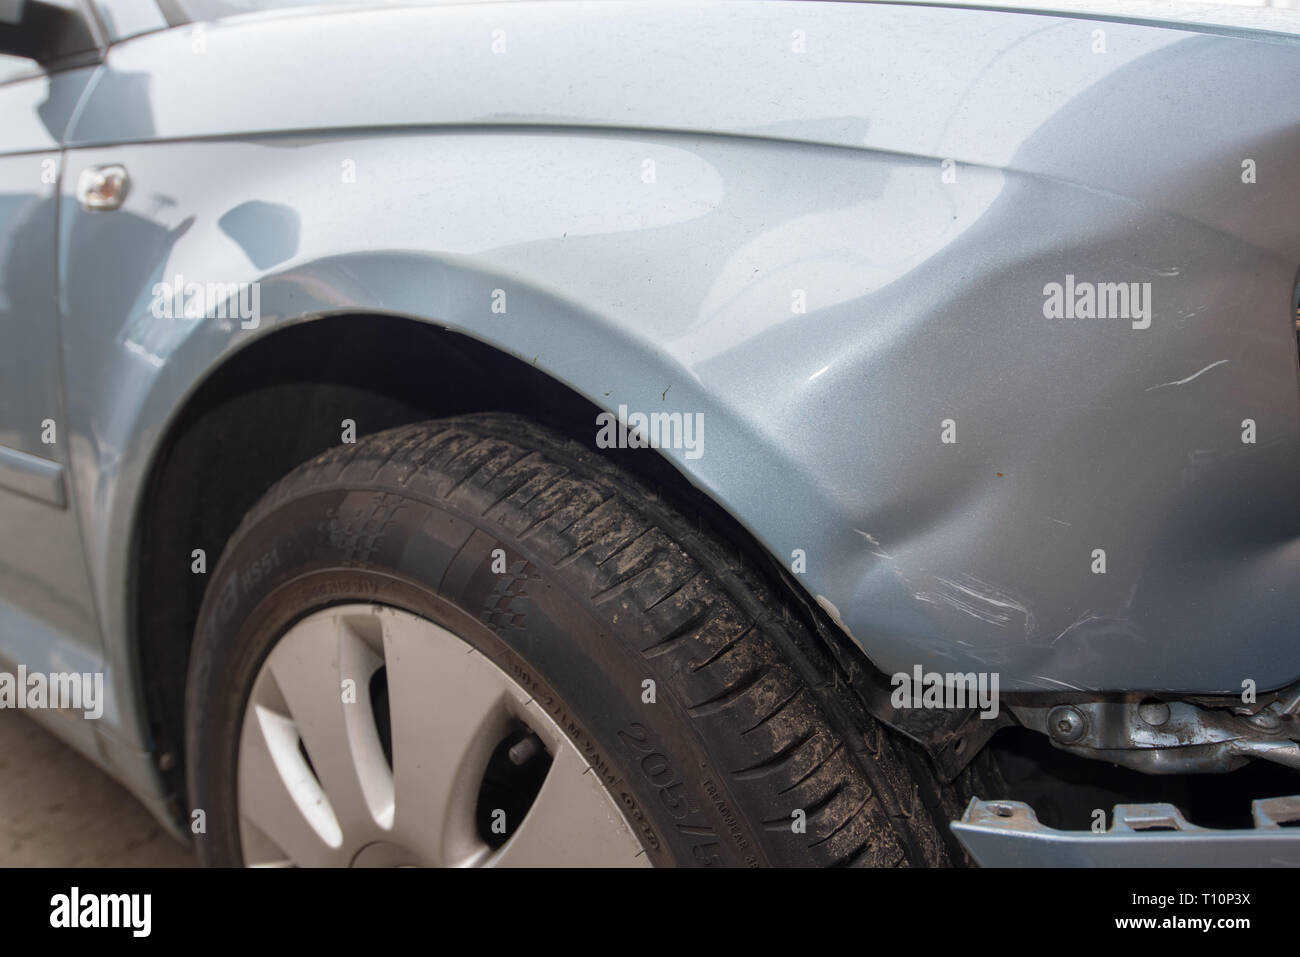 Car crash. Silver vehicle in front end collision. Damage to bumper/ wheel arch/ headlight. Brick work backgroun. UK Stock Photo